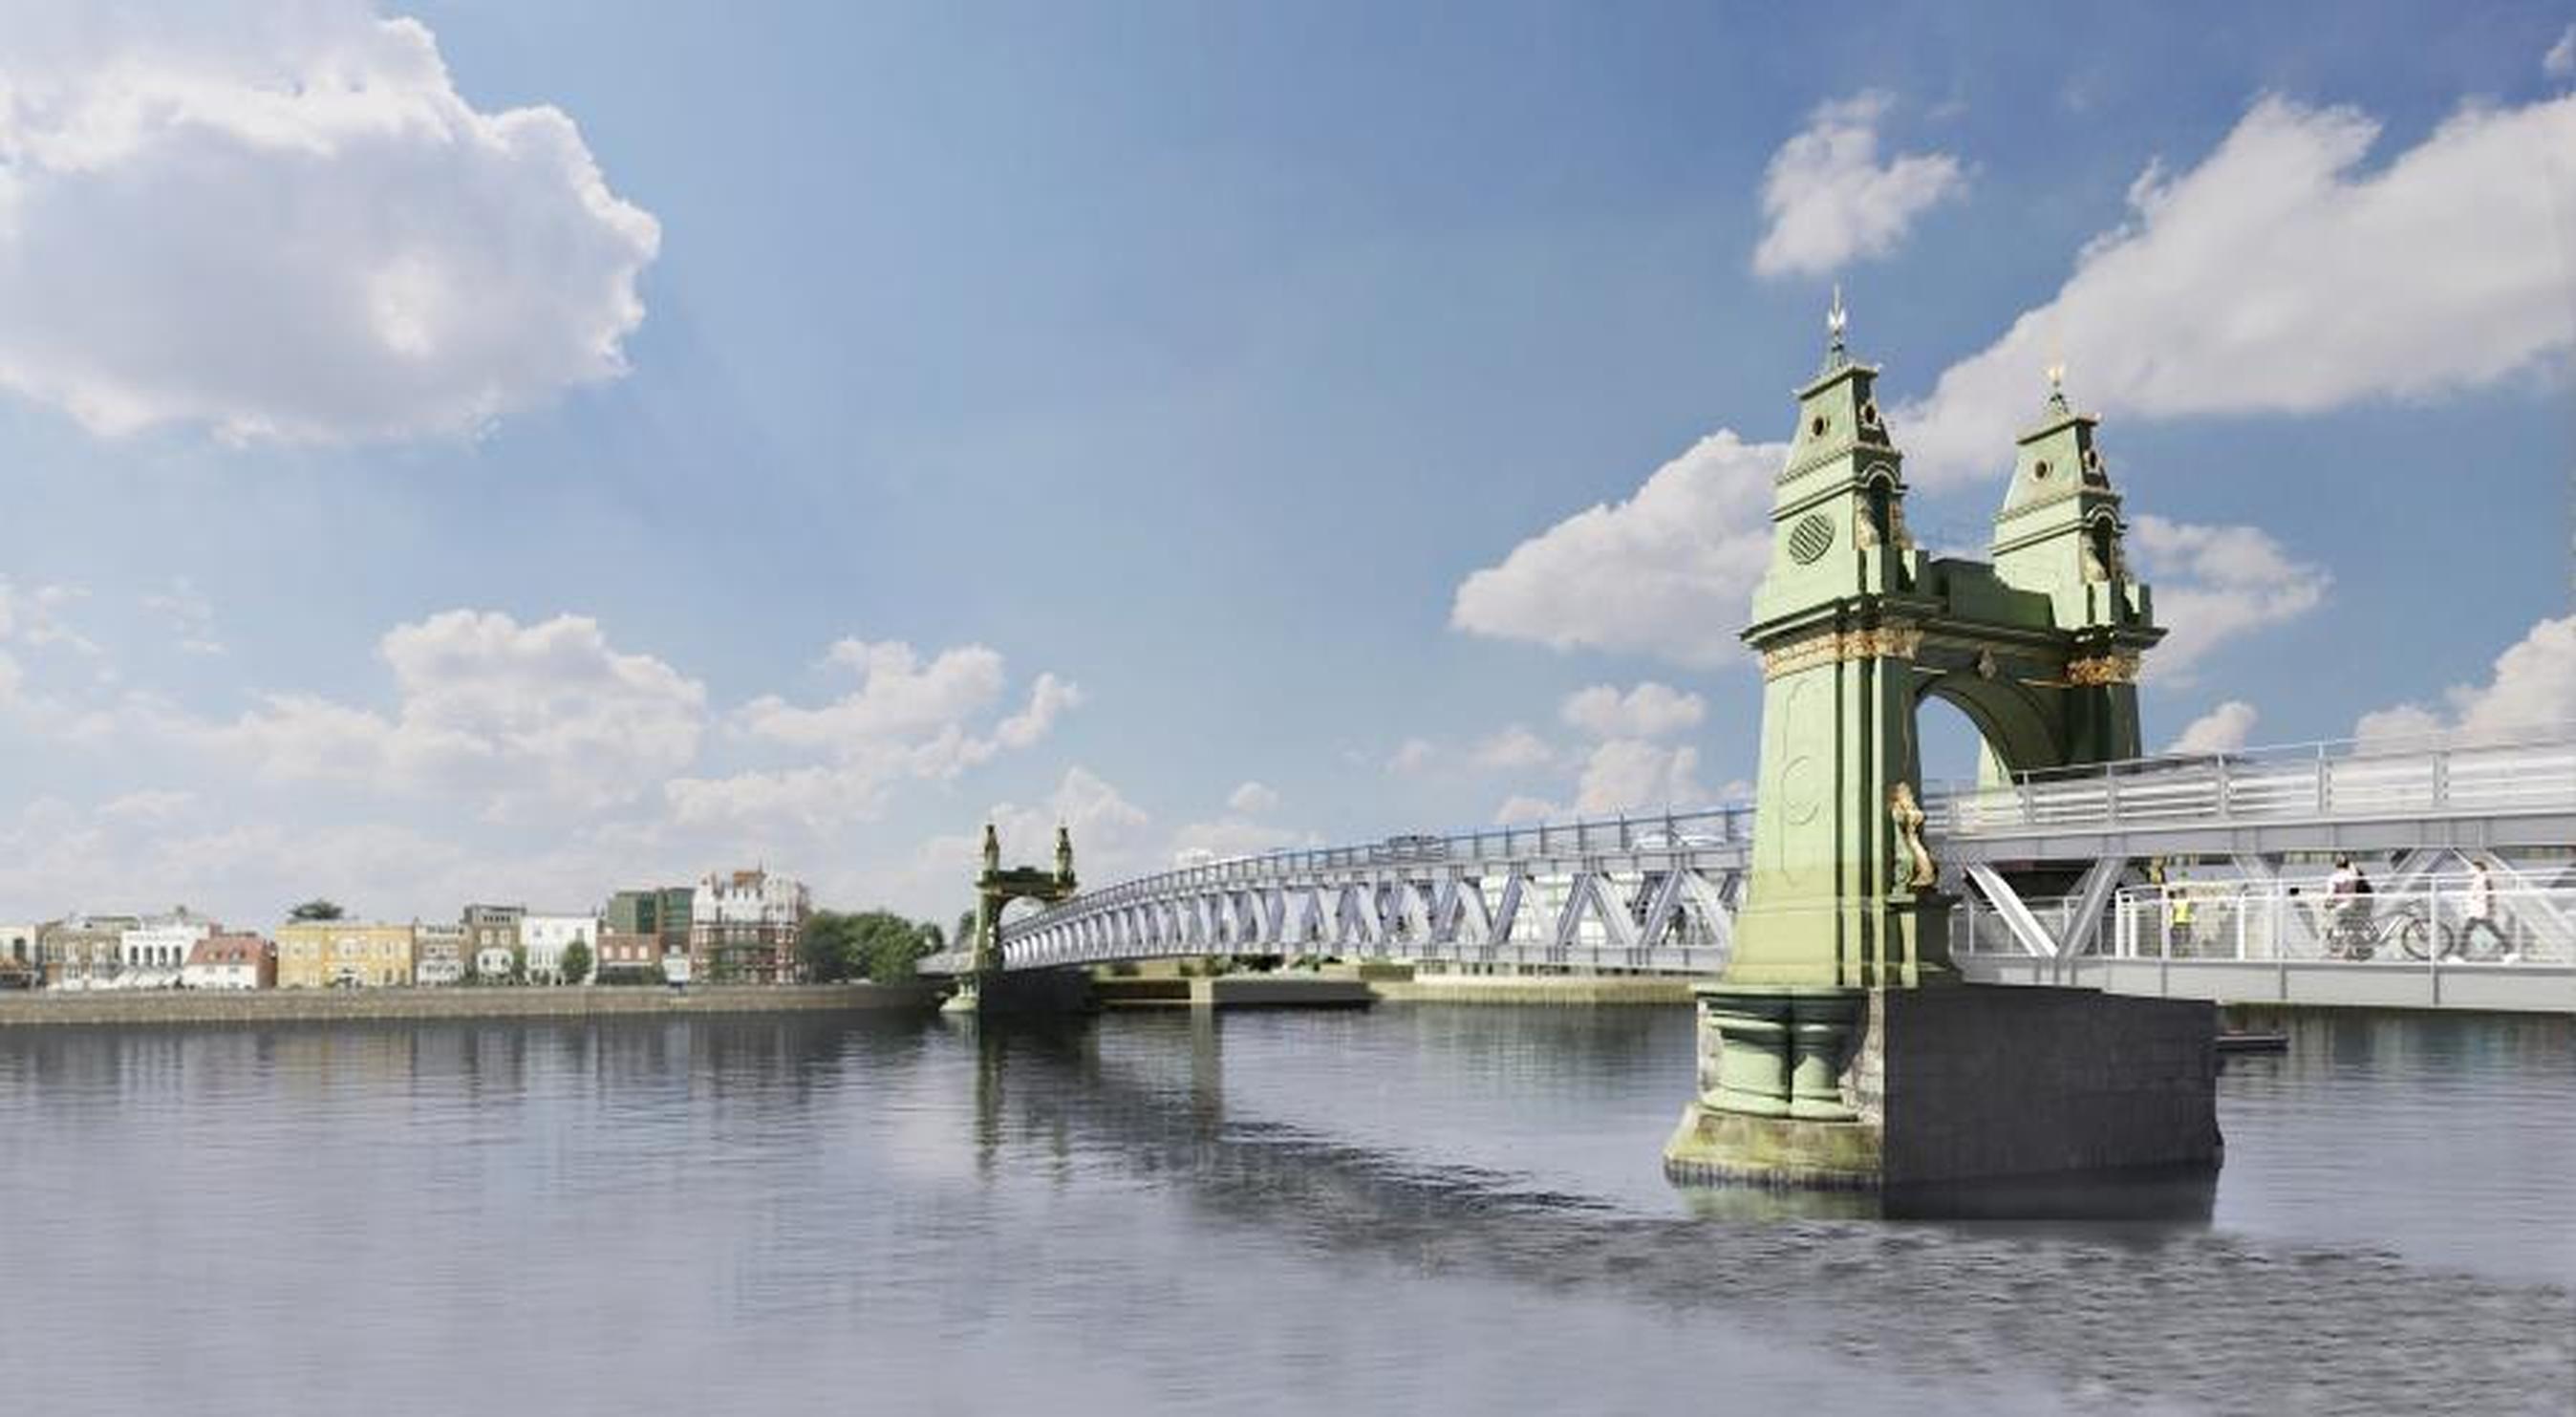 The Grade II listed Hammersmith Bridge, which opened in 1887, was closed in 2020 after defects were found